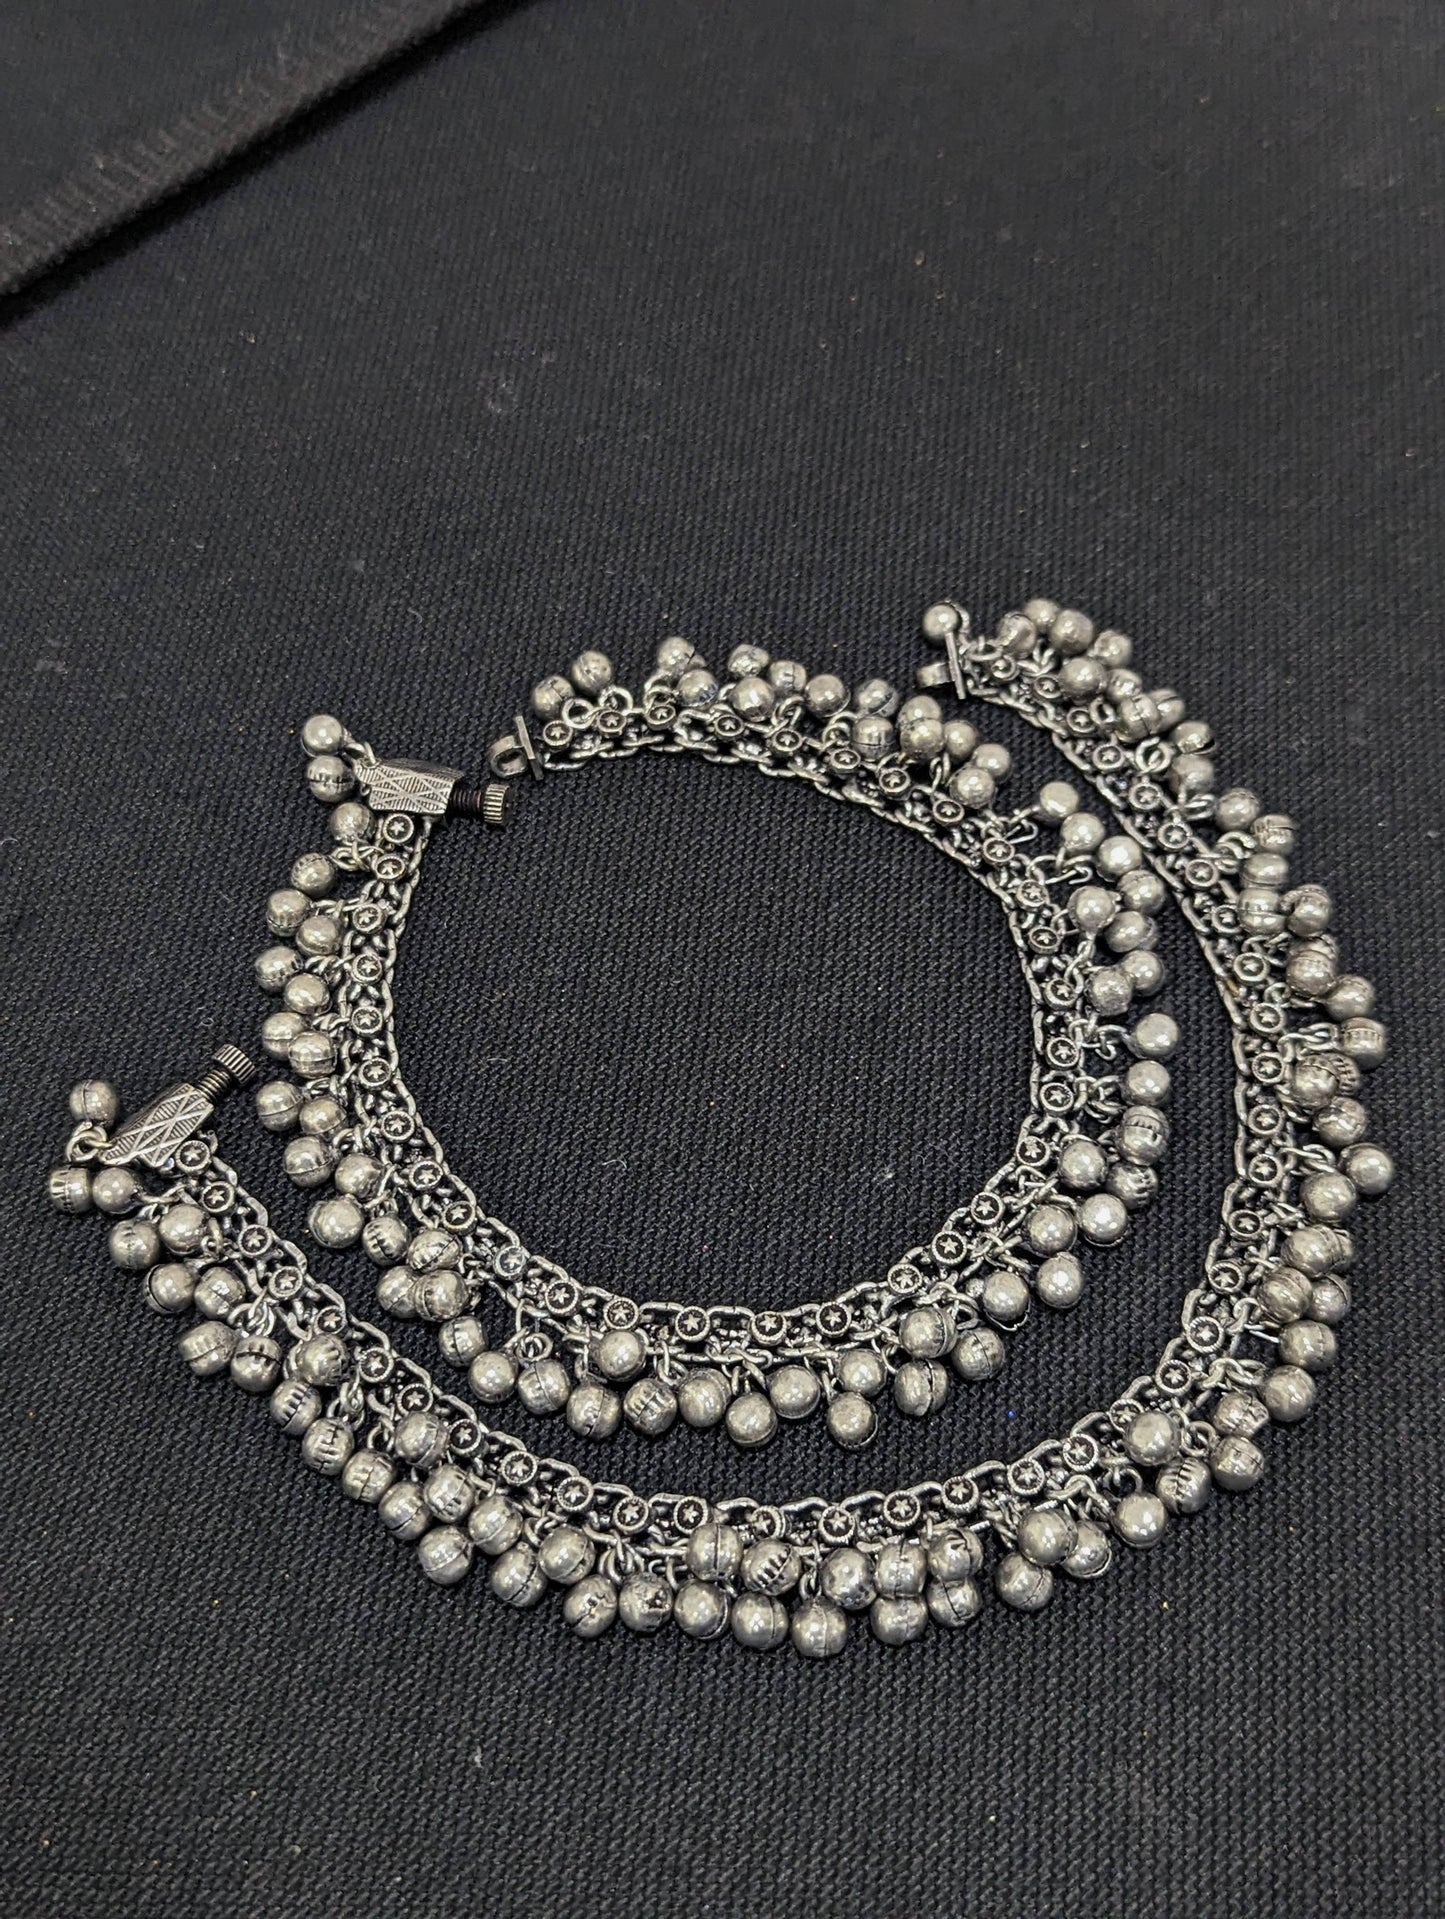 Oxidized Silver Ghunghru bead Anklets - D1